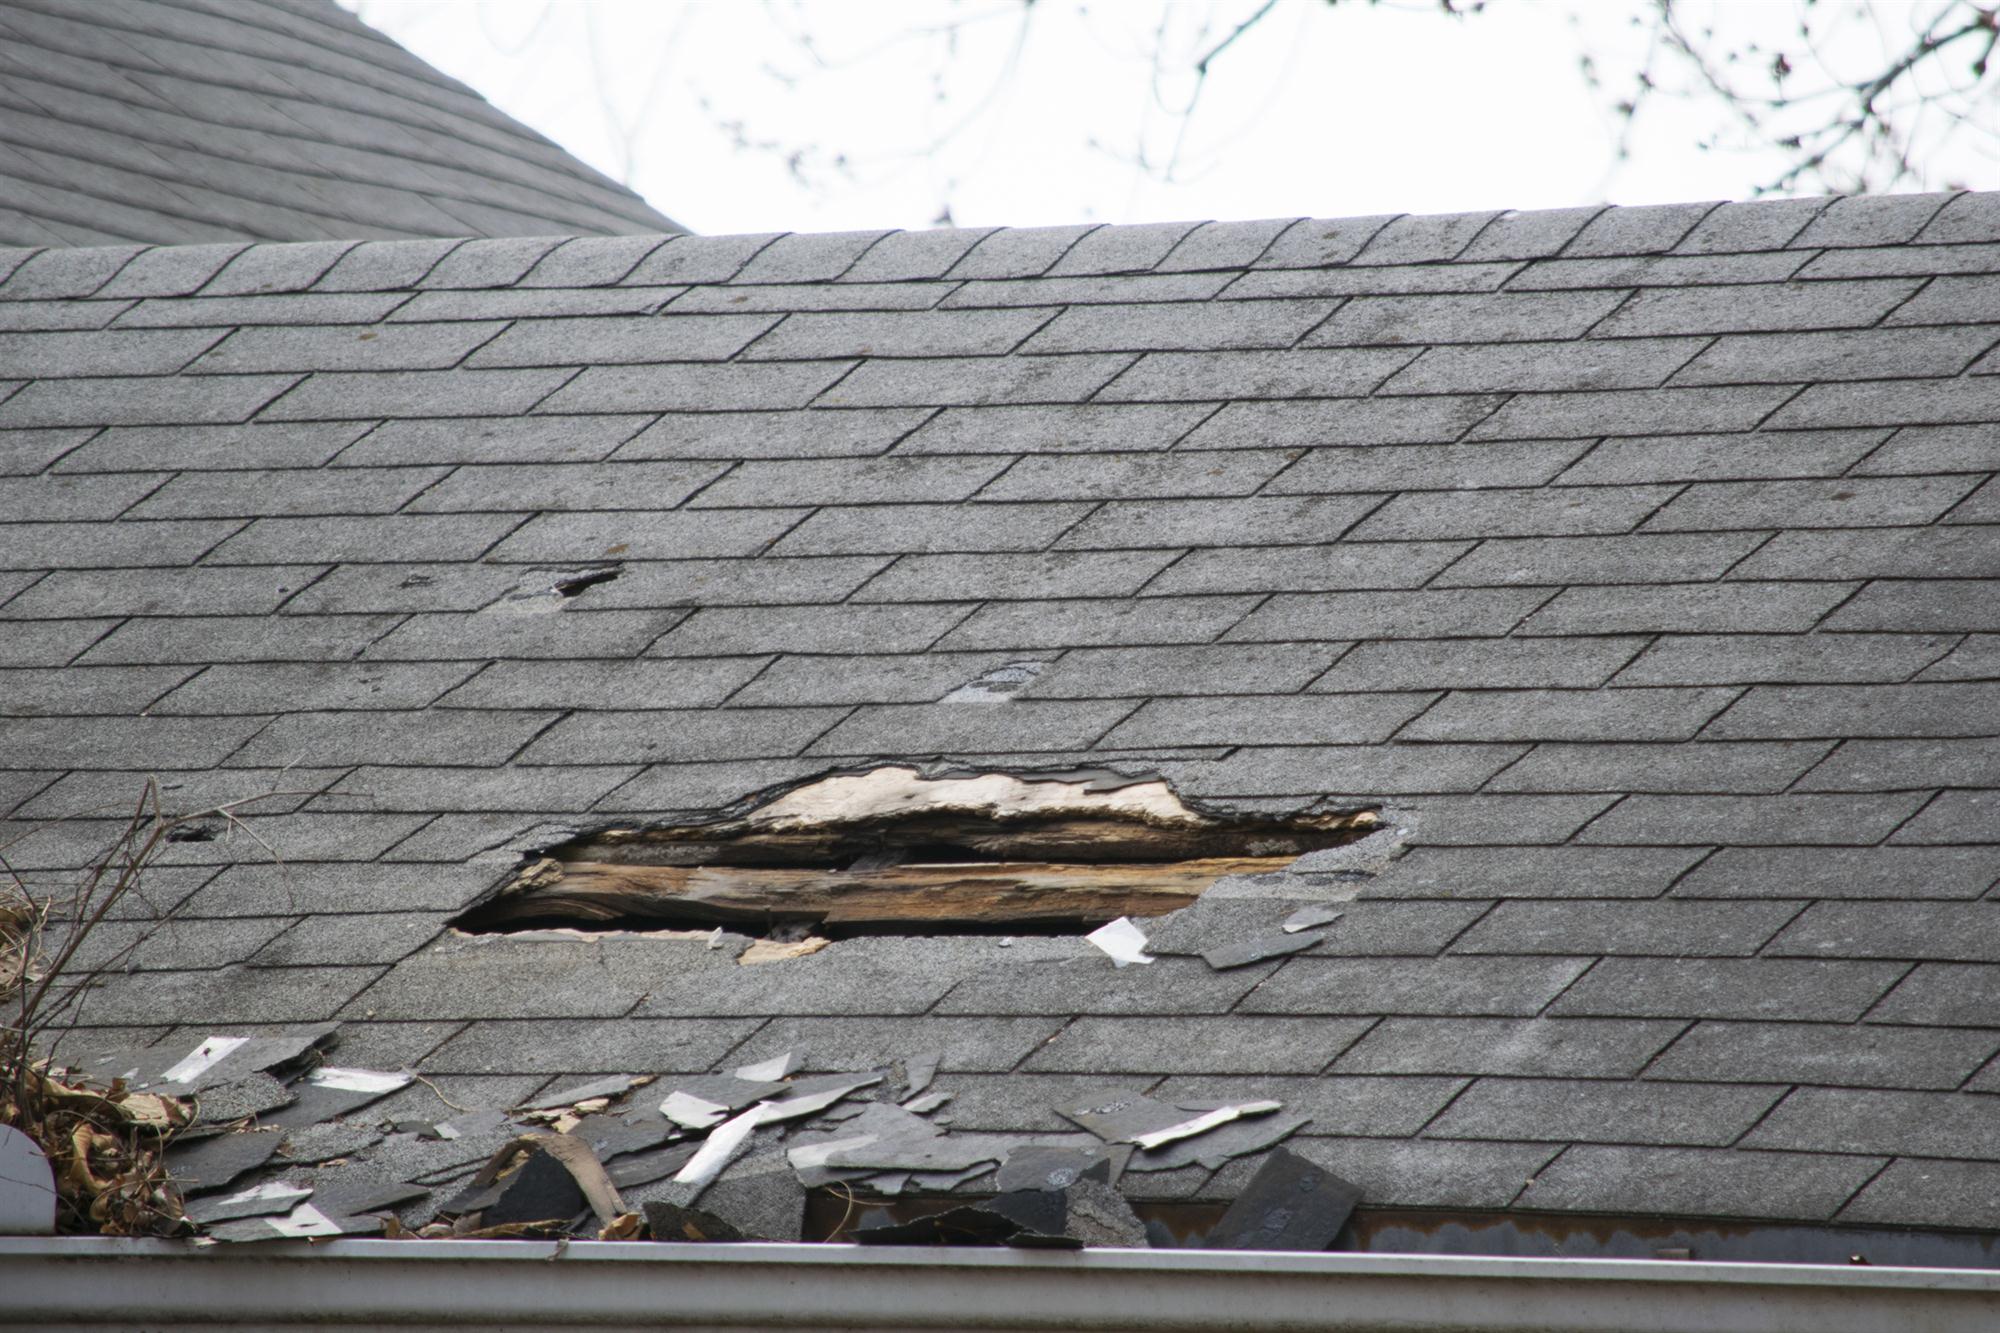 Roof has hole in it and needs to be repaired